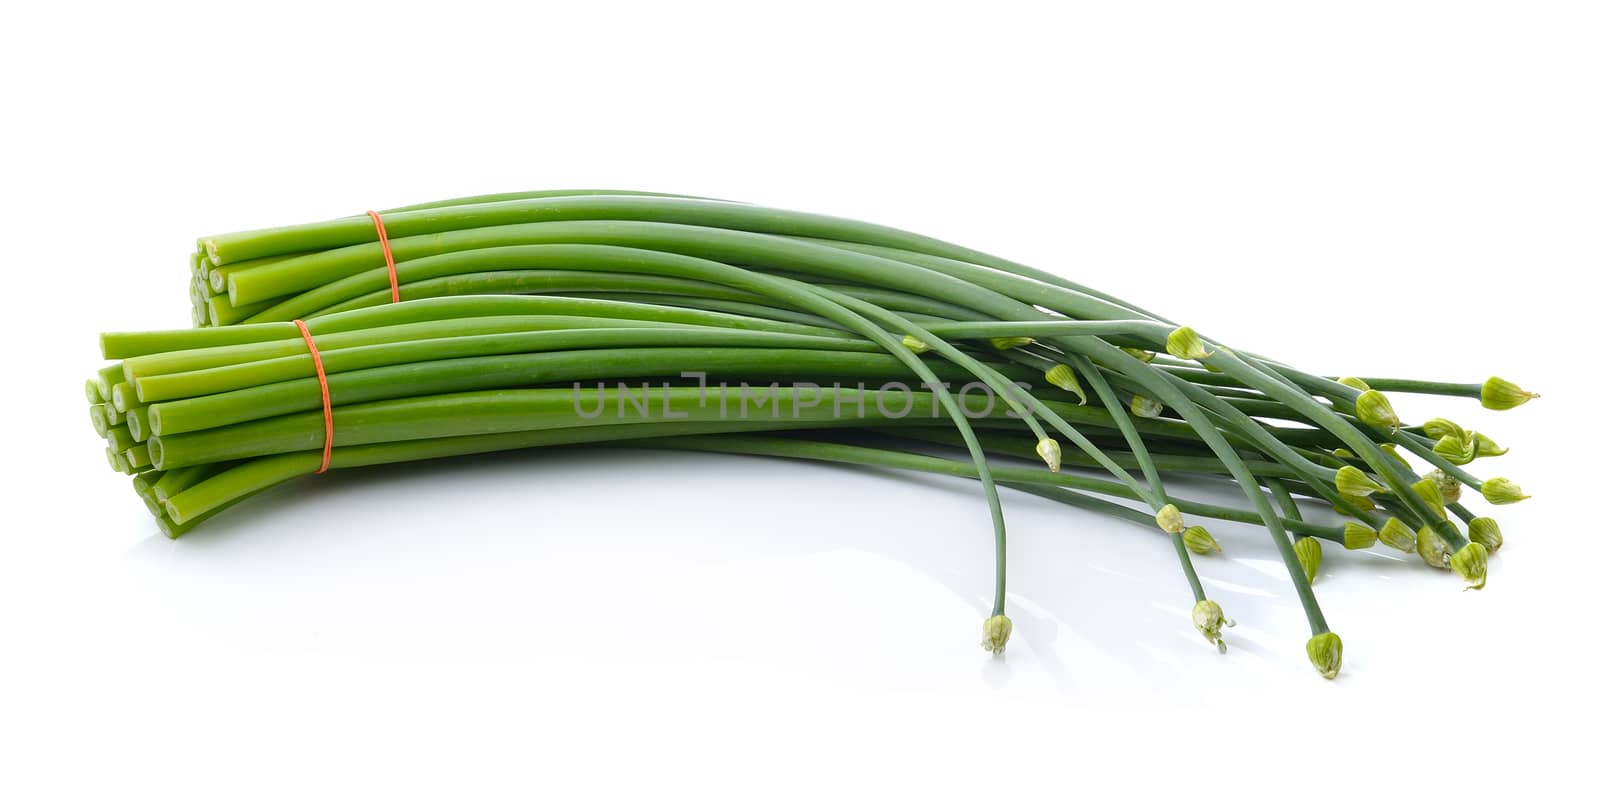 Green Onion on white background by sommai